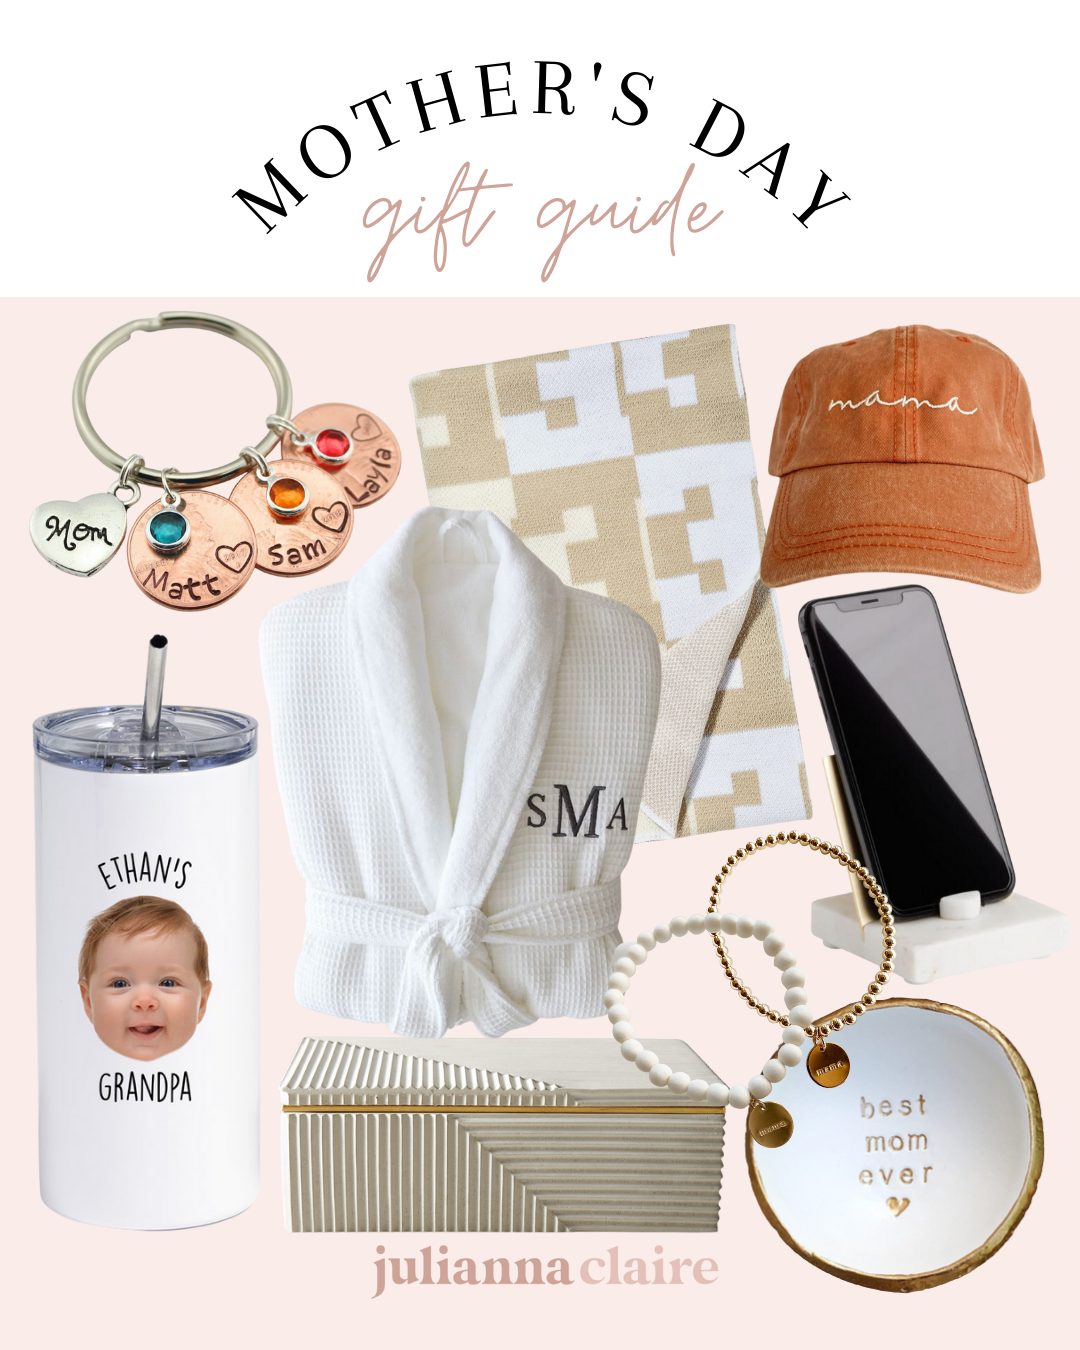 Mother's Day gifts: the ULTIMATE guide for every type of mom